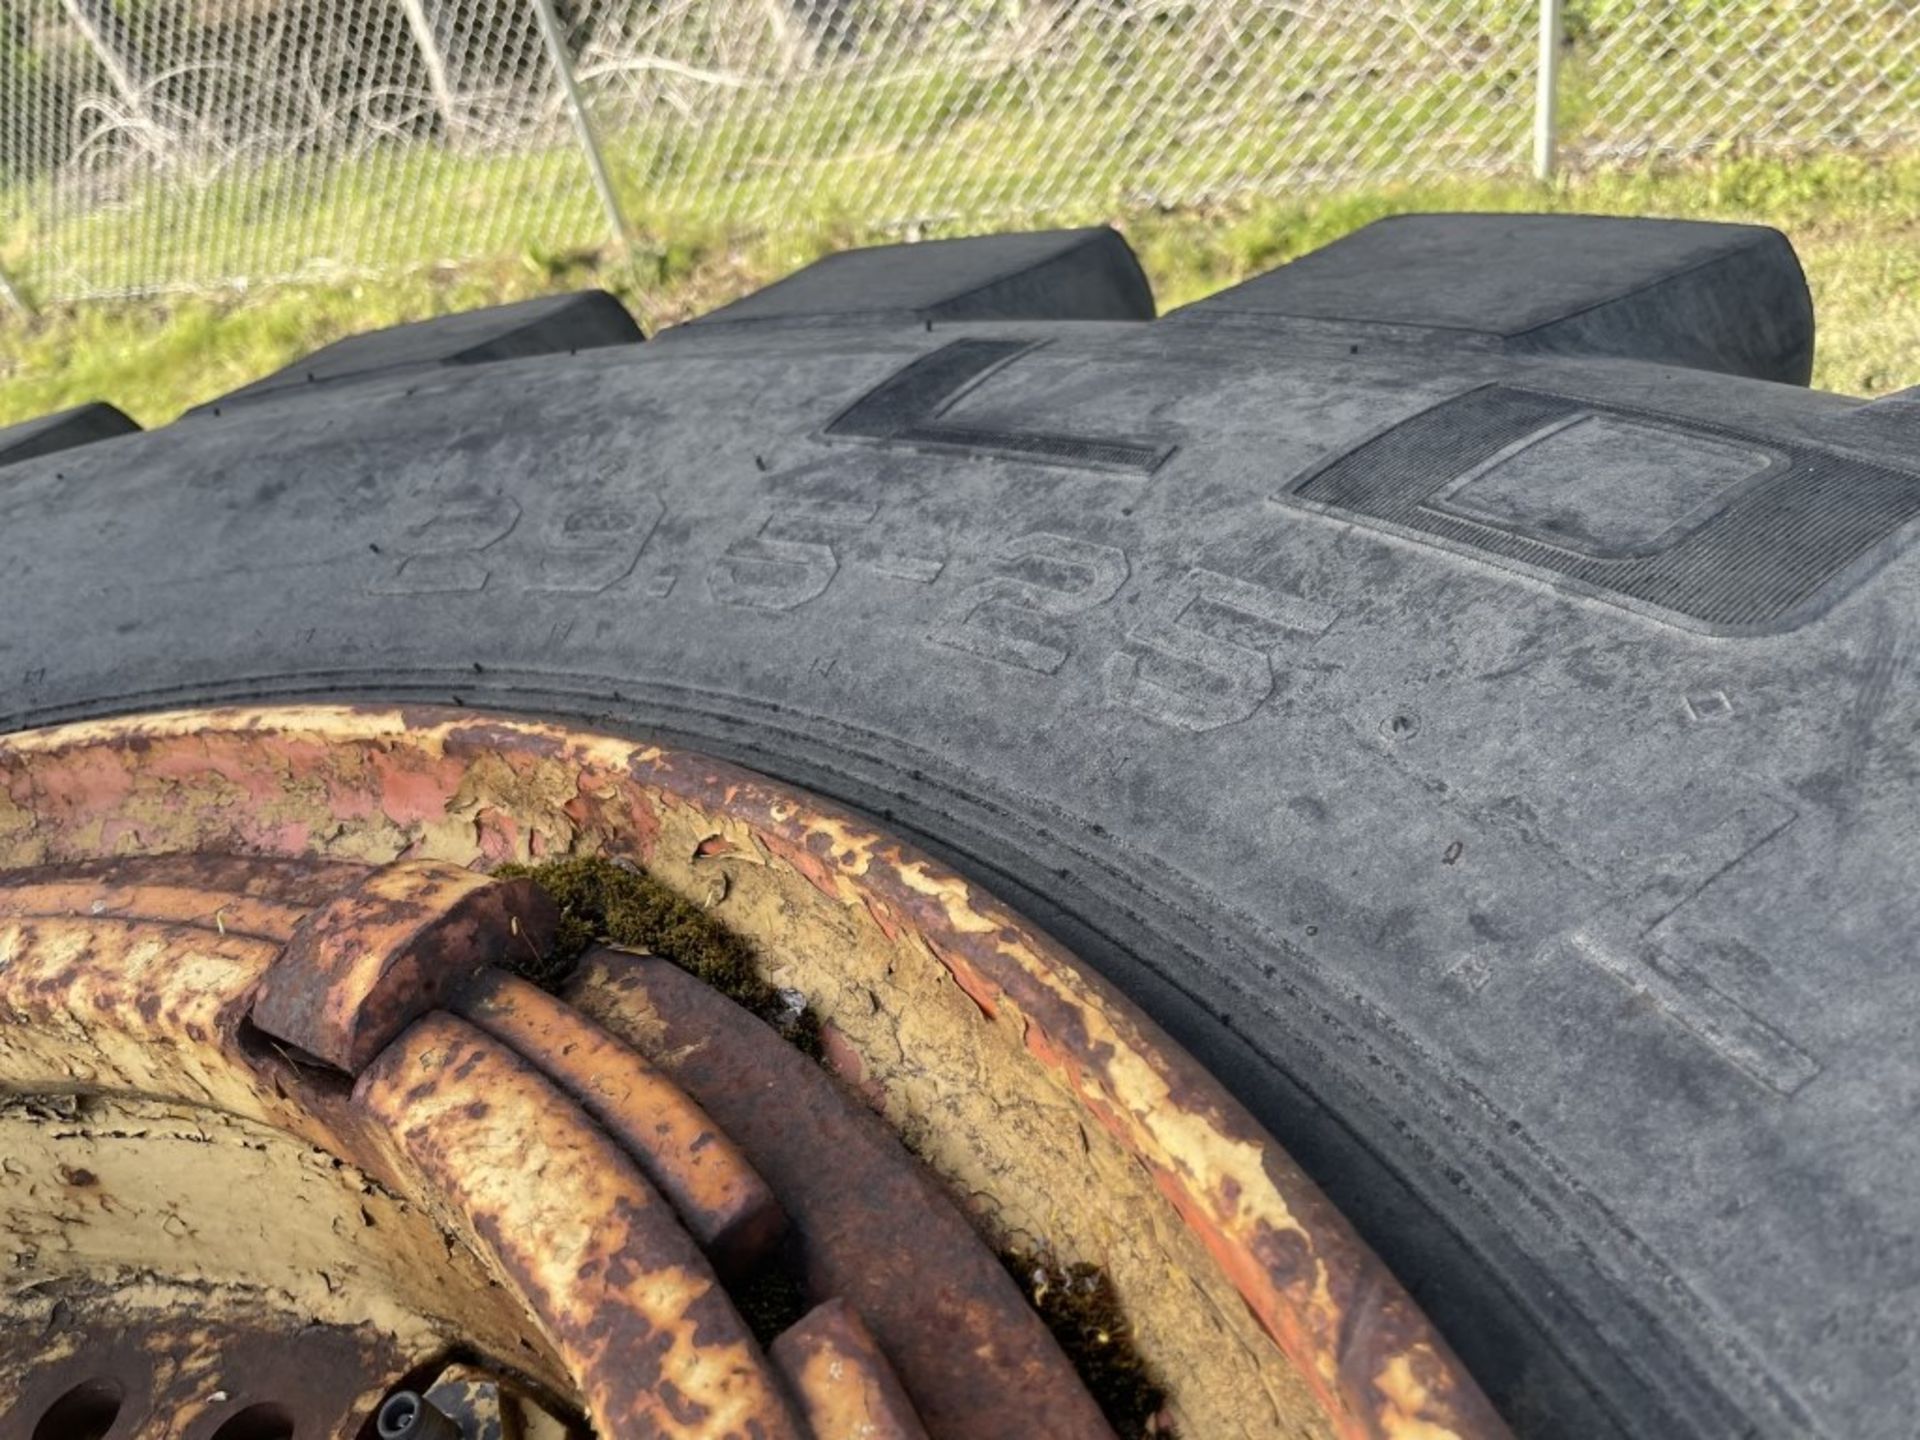 General 29.5-25 Tires w/ Rims, Qty. 2 - Image 3 of 3